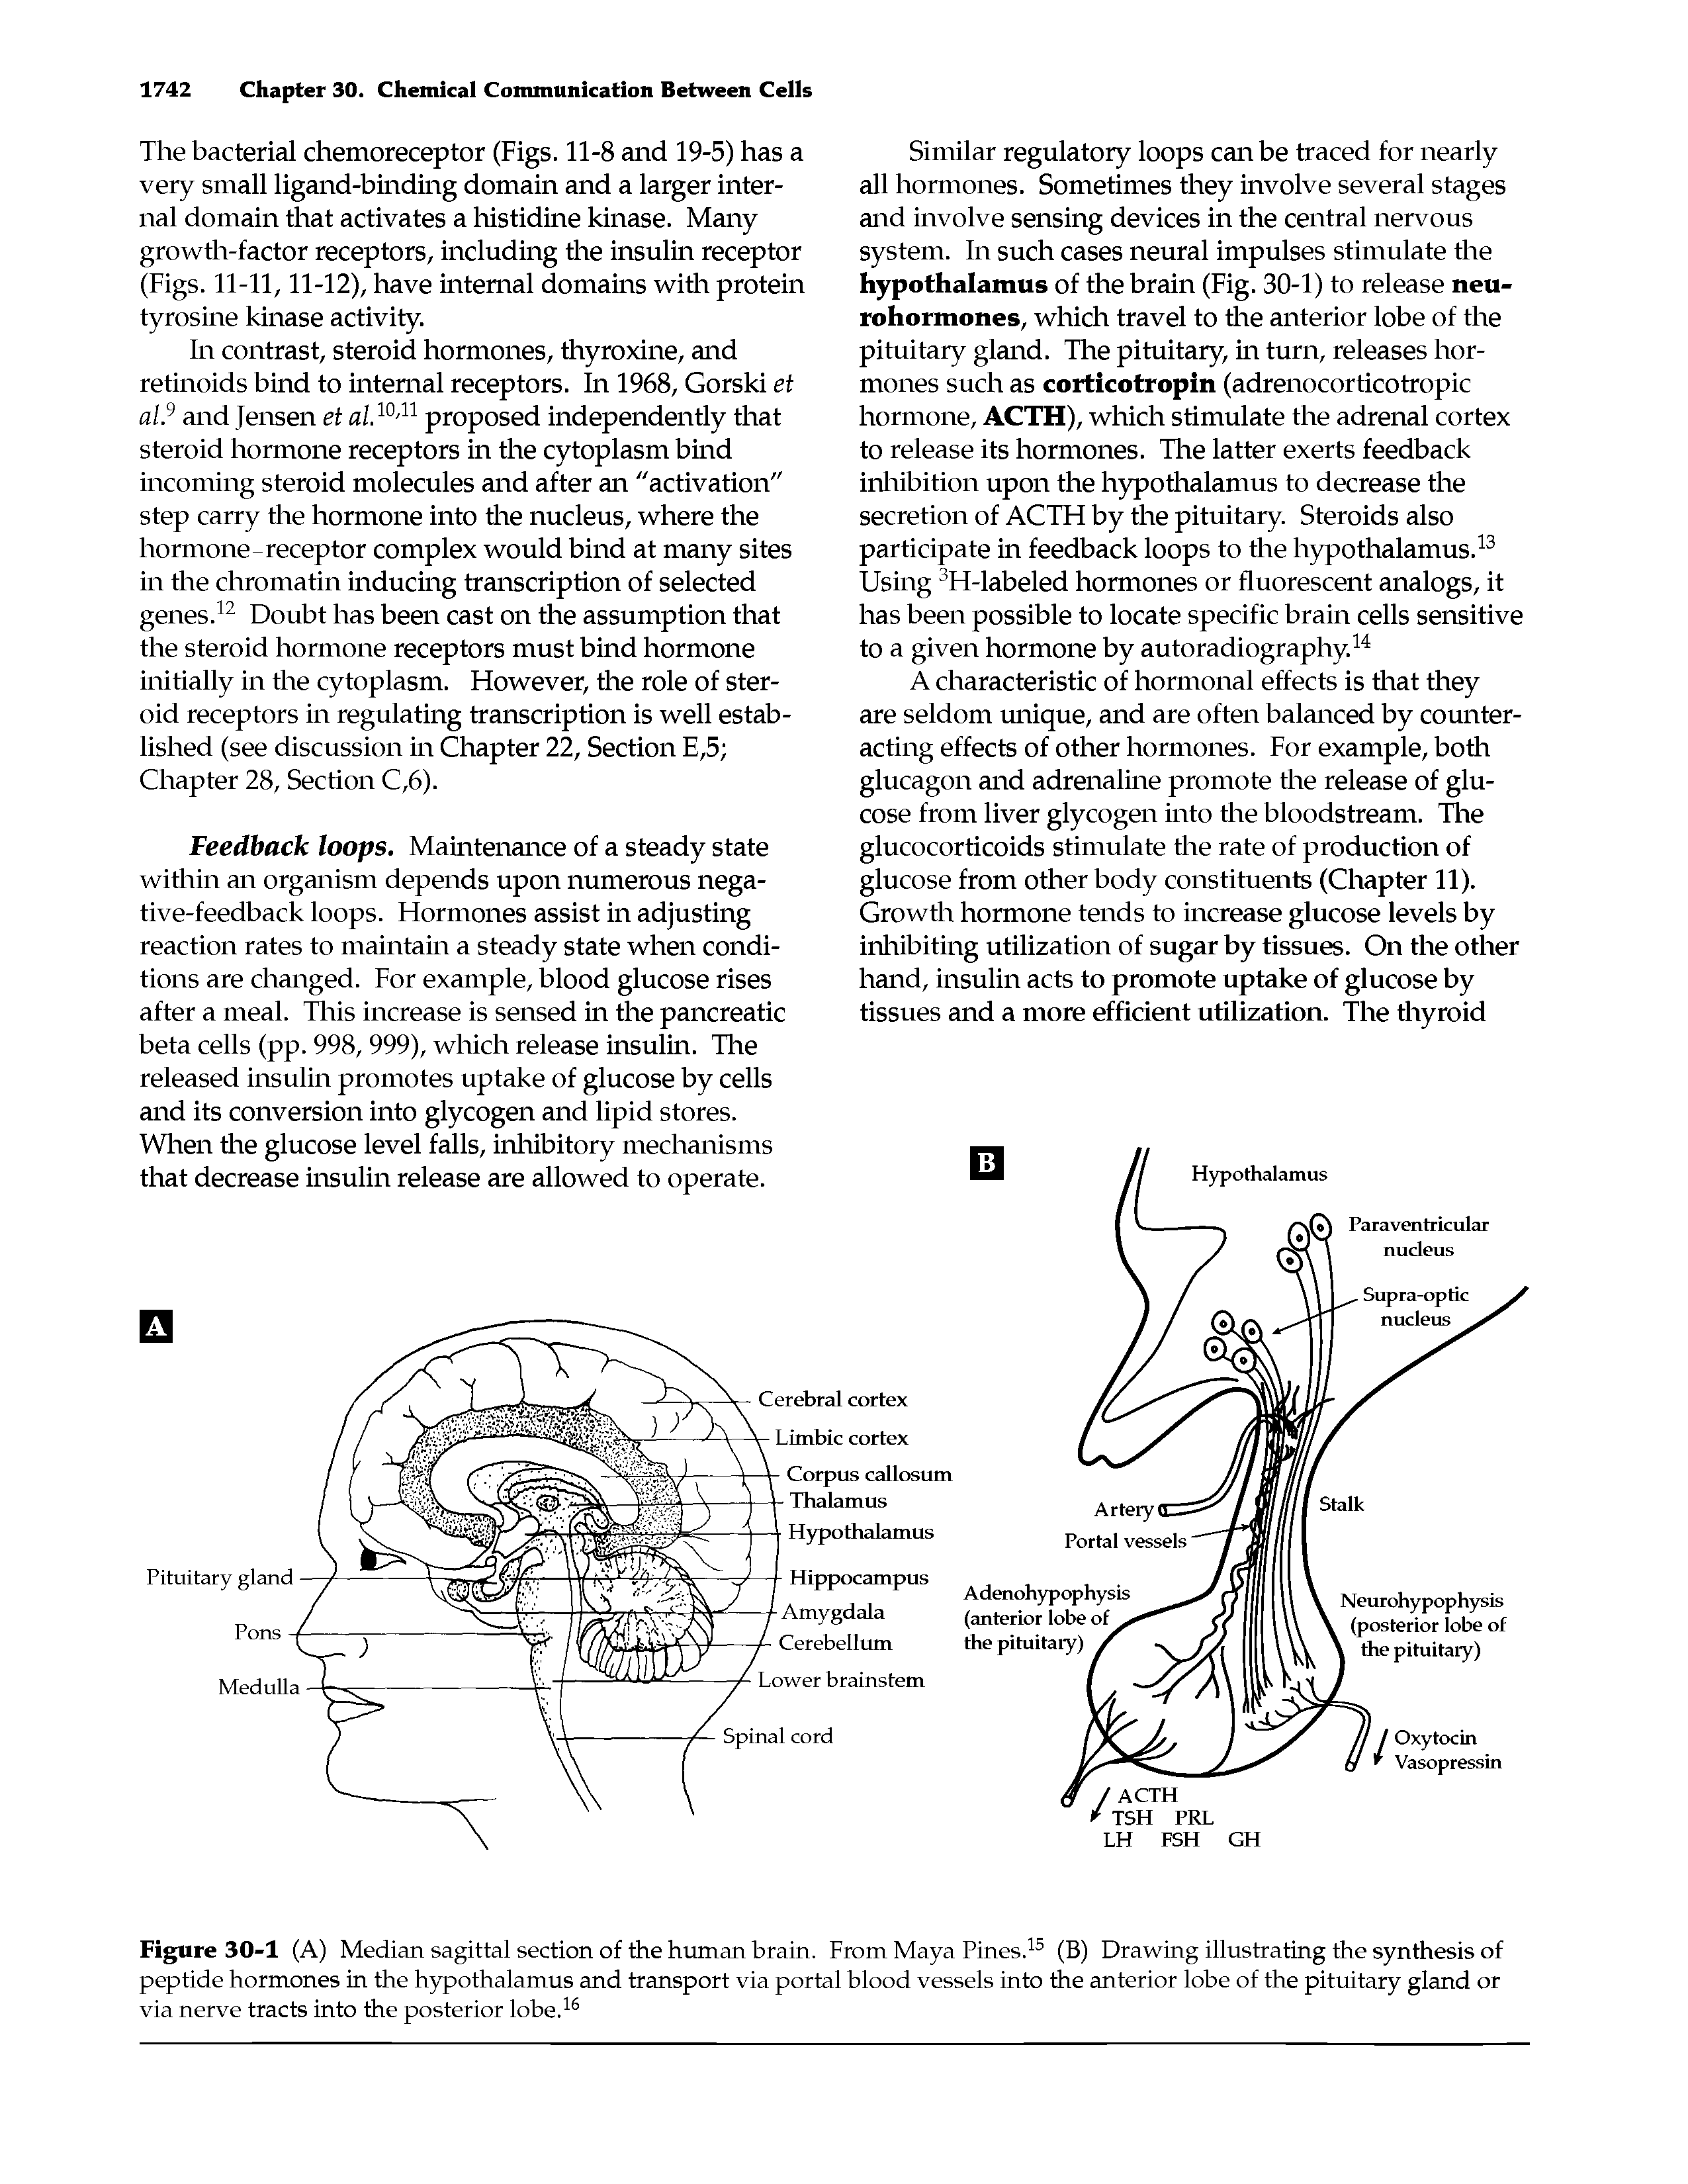 Figure 30-1 (A) Median sagittal section of the human brain. From Maya Pines.15 (B) Drawing illustrating the synthesis of peptide hormones in the hypothalamus and transport via portal blood vessels into the anterior lobe of the pituitary gland or via nerve tracts into the posterior lobe.16...